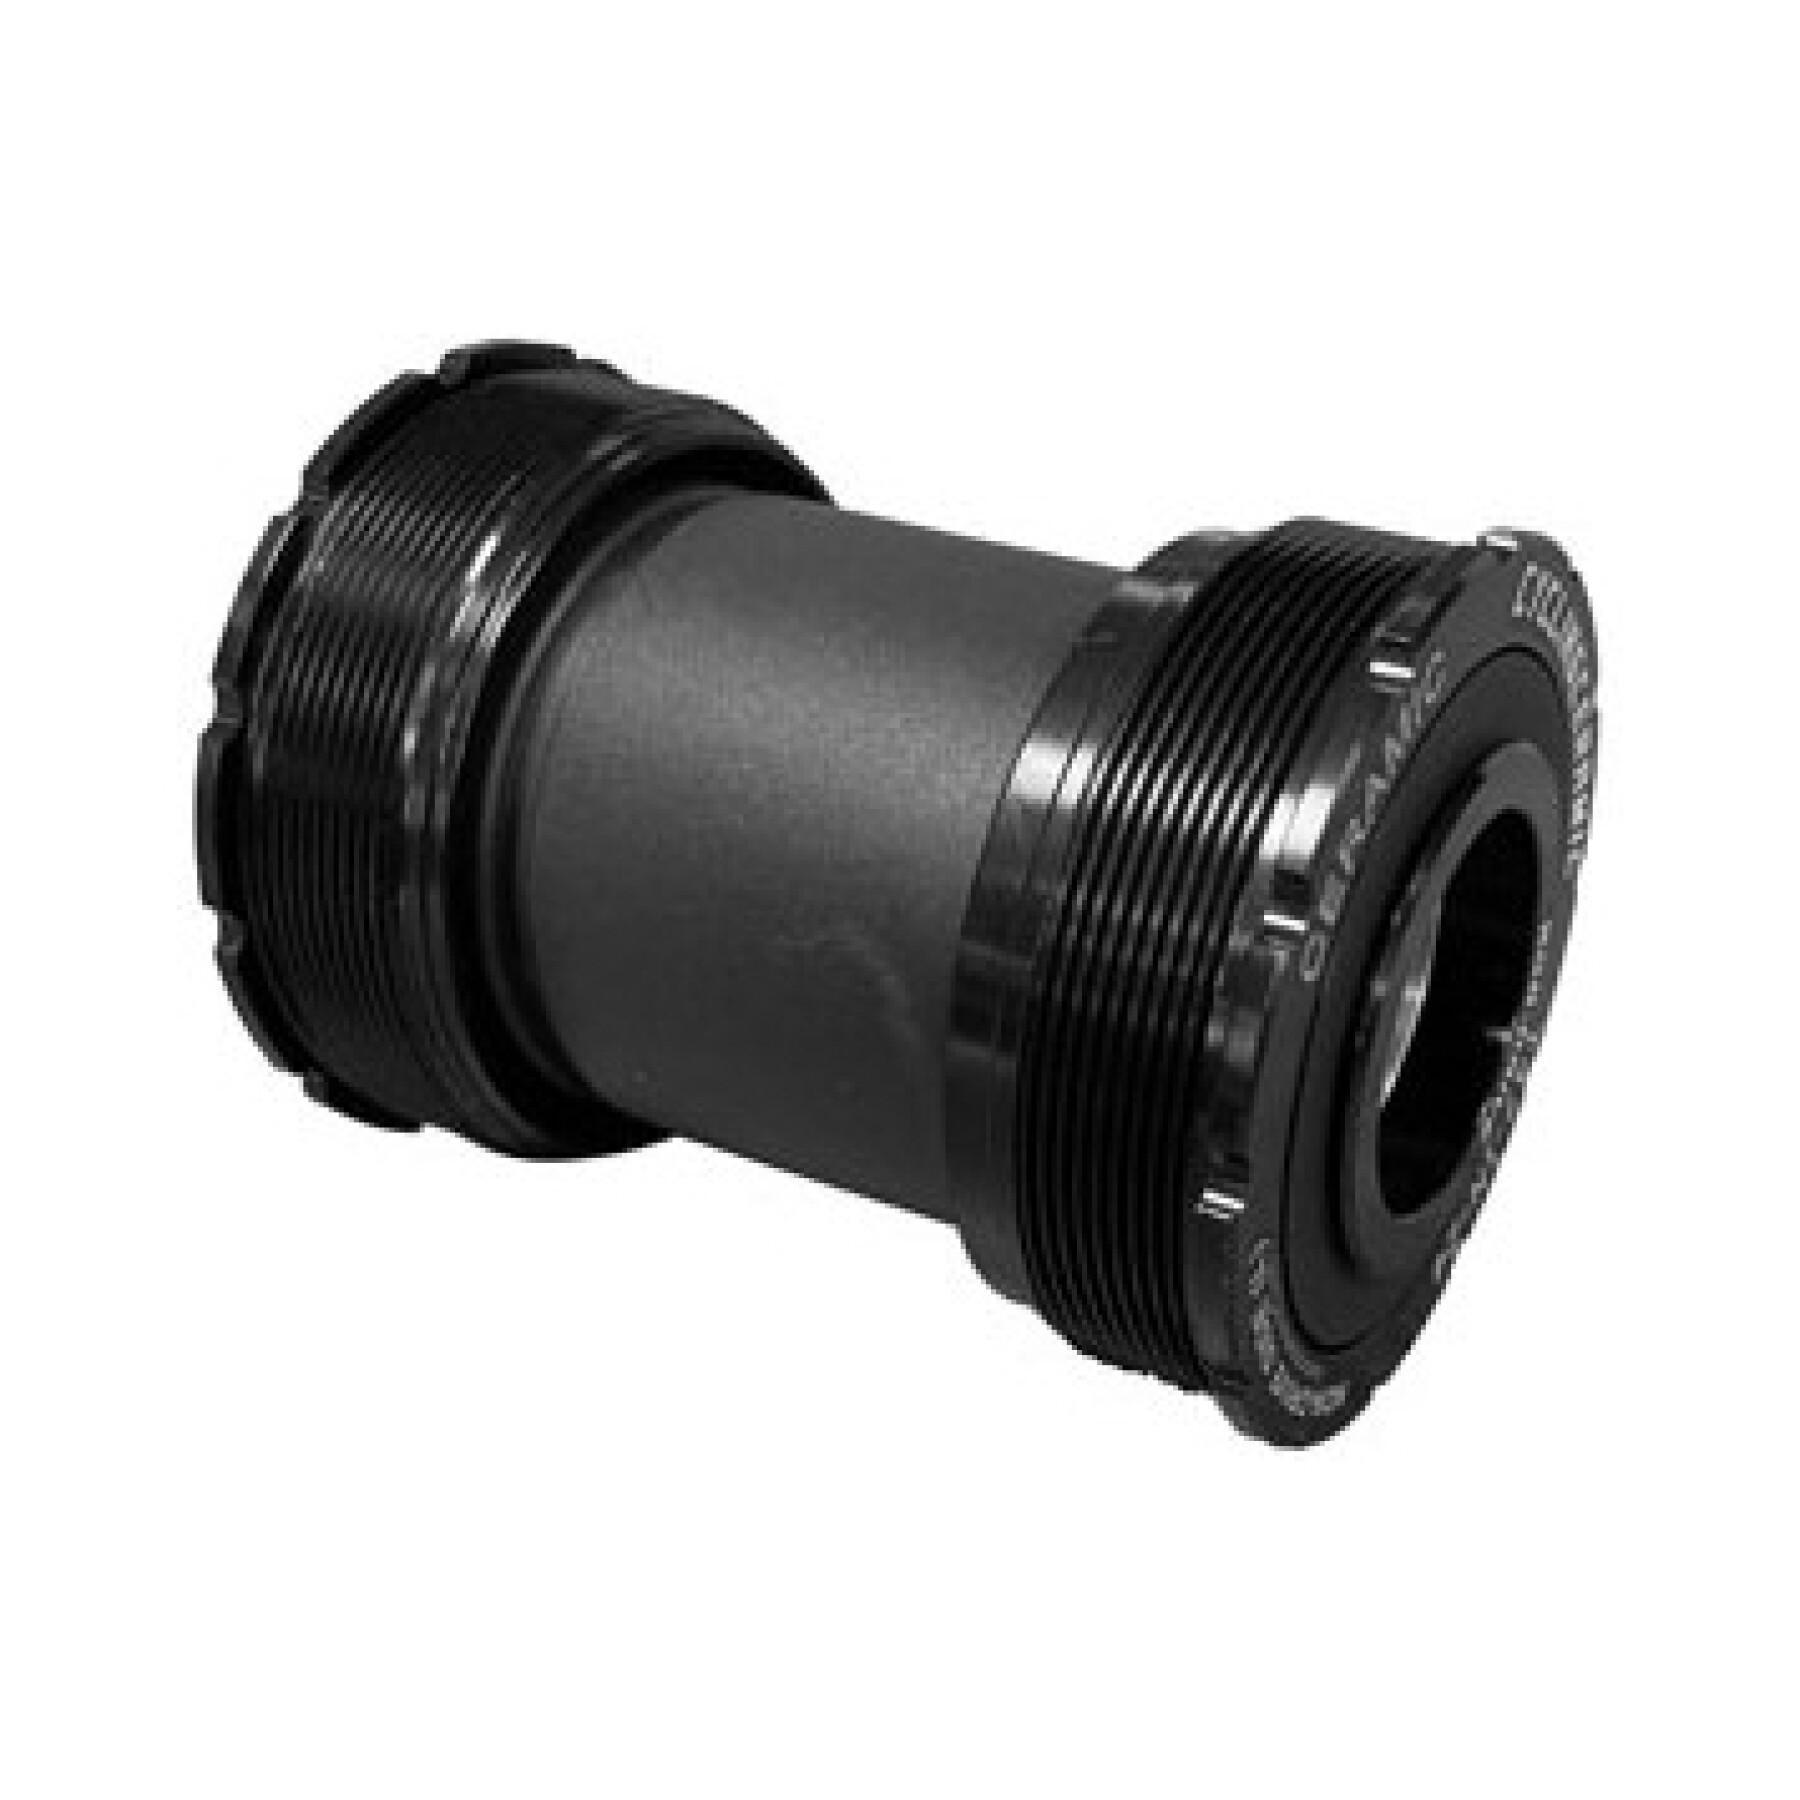 Bottom bracket Cycling Ceramic t47 - in cup shimano